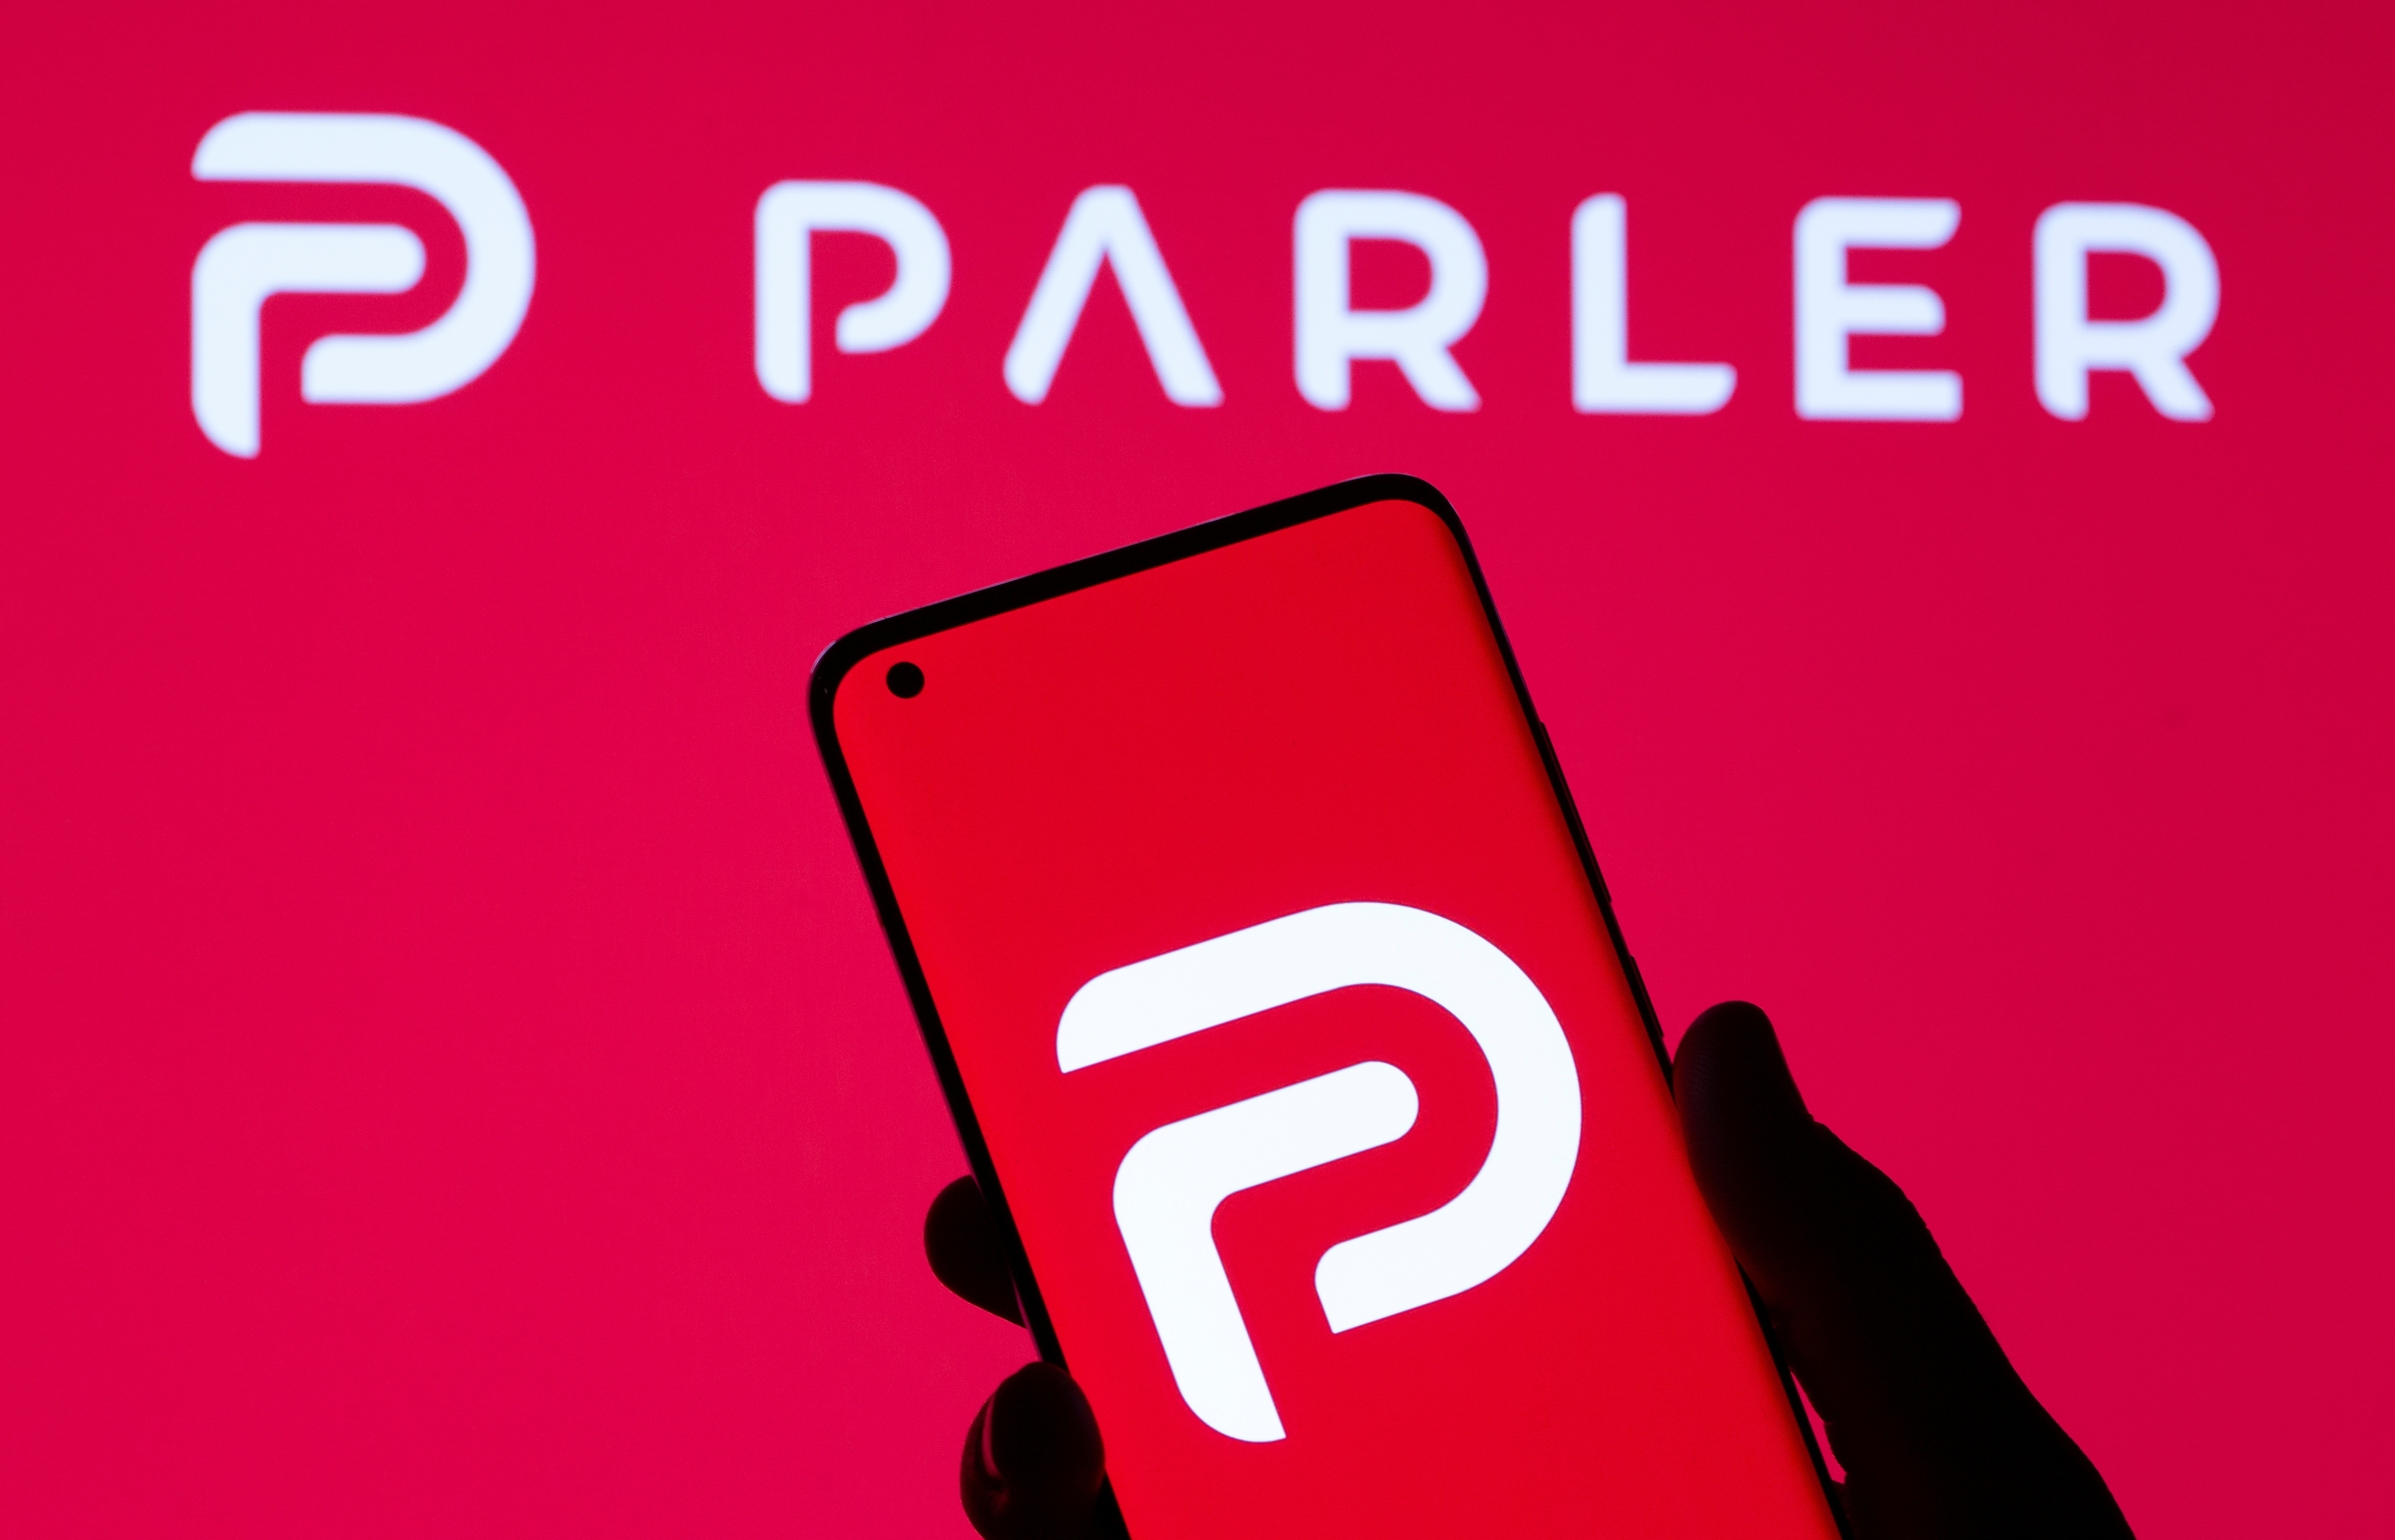 Woman holding smartphone with Parler logo in front of displayed same logo in this illustration